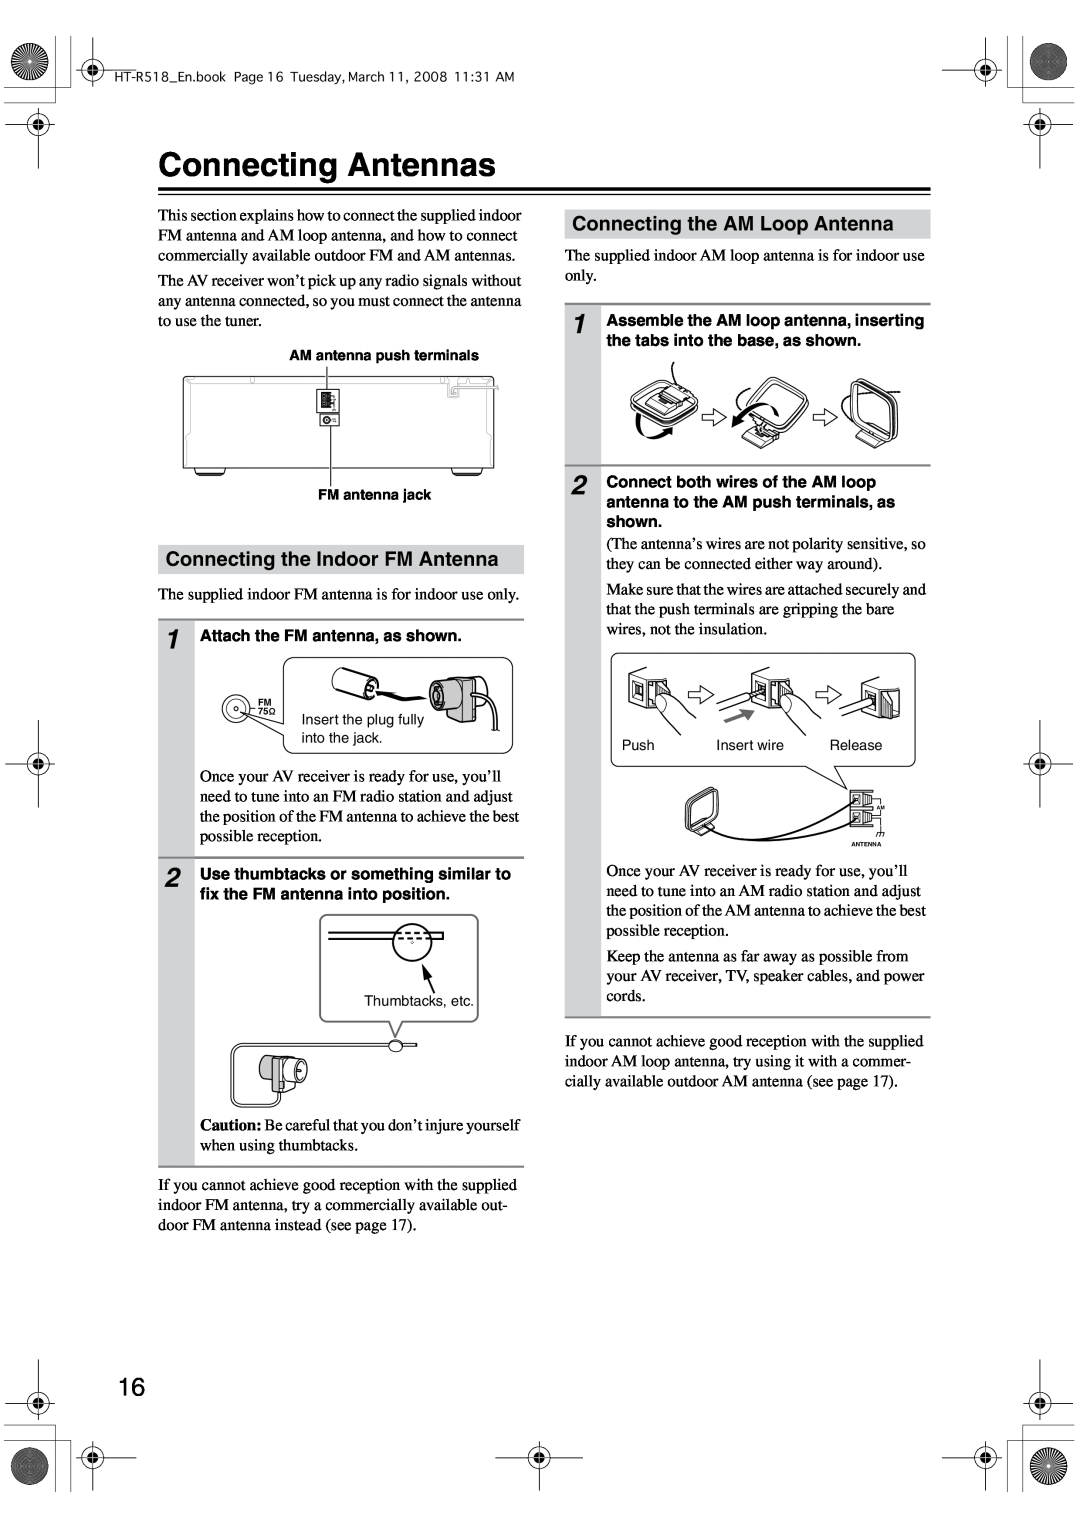 Onkyo HT-R518 instruction manual Connecting Antennas, Connecting the Indoor FM Antenna, Connecting the AM Loop Antenna 